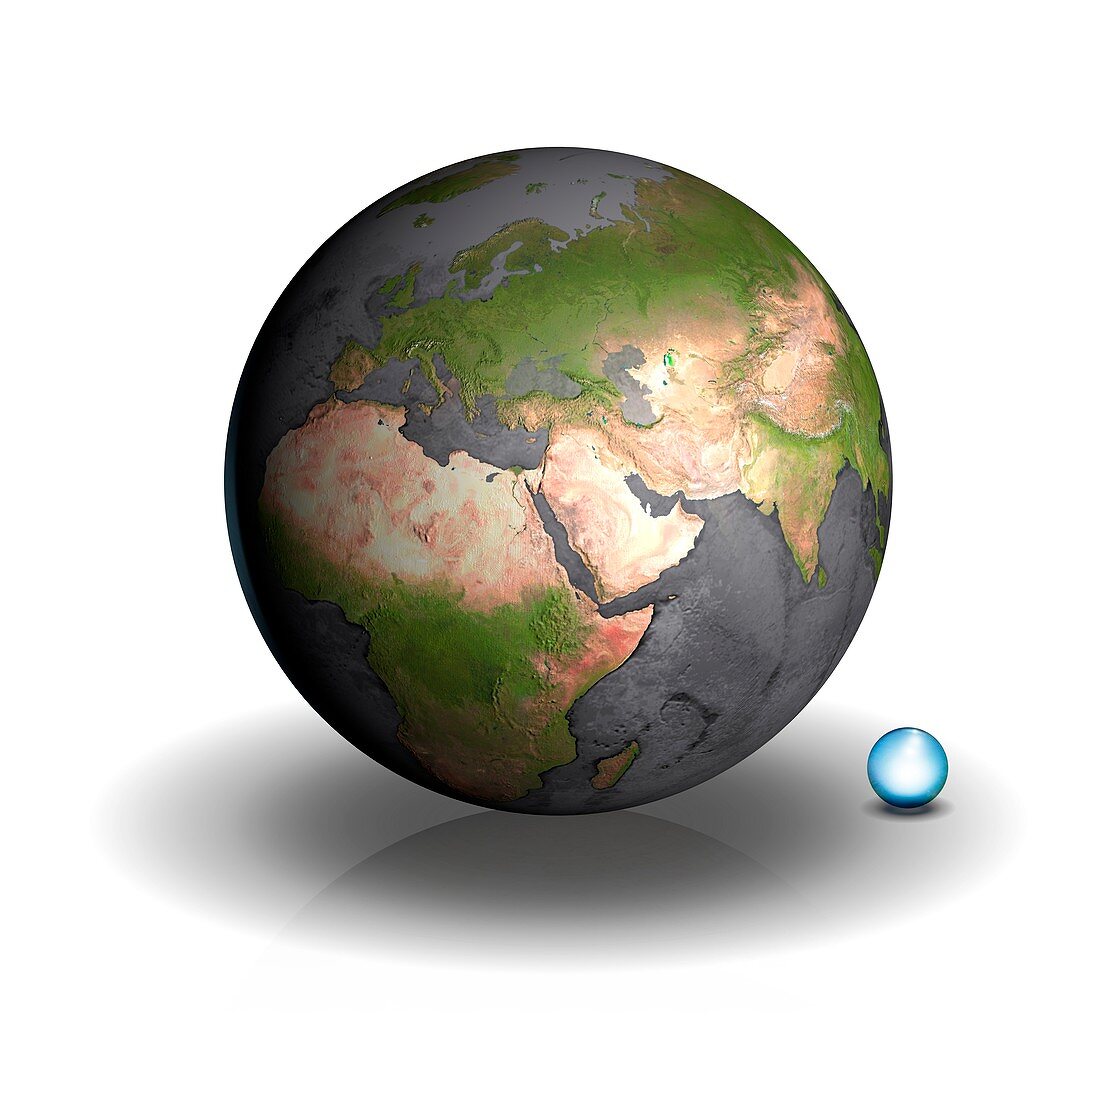 Volume of Earth's Water